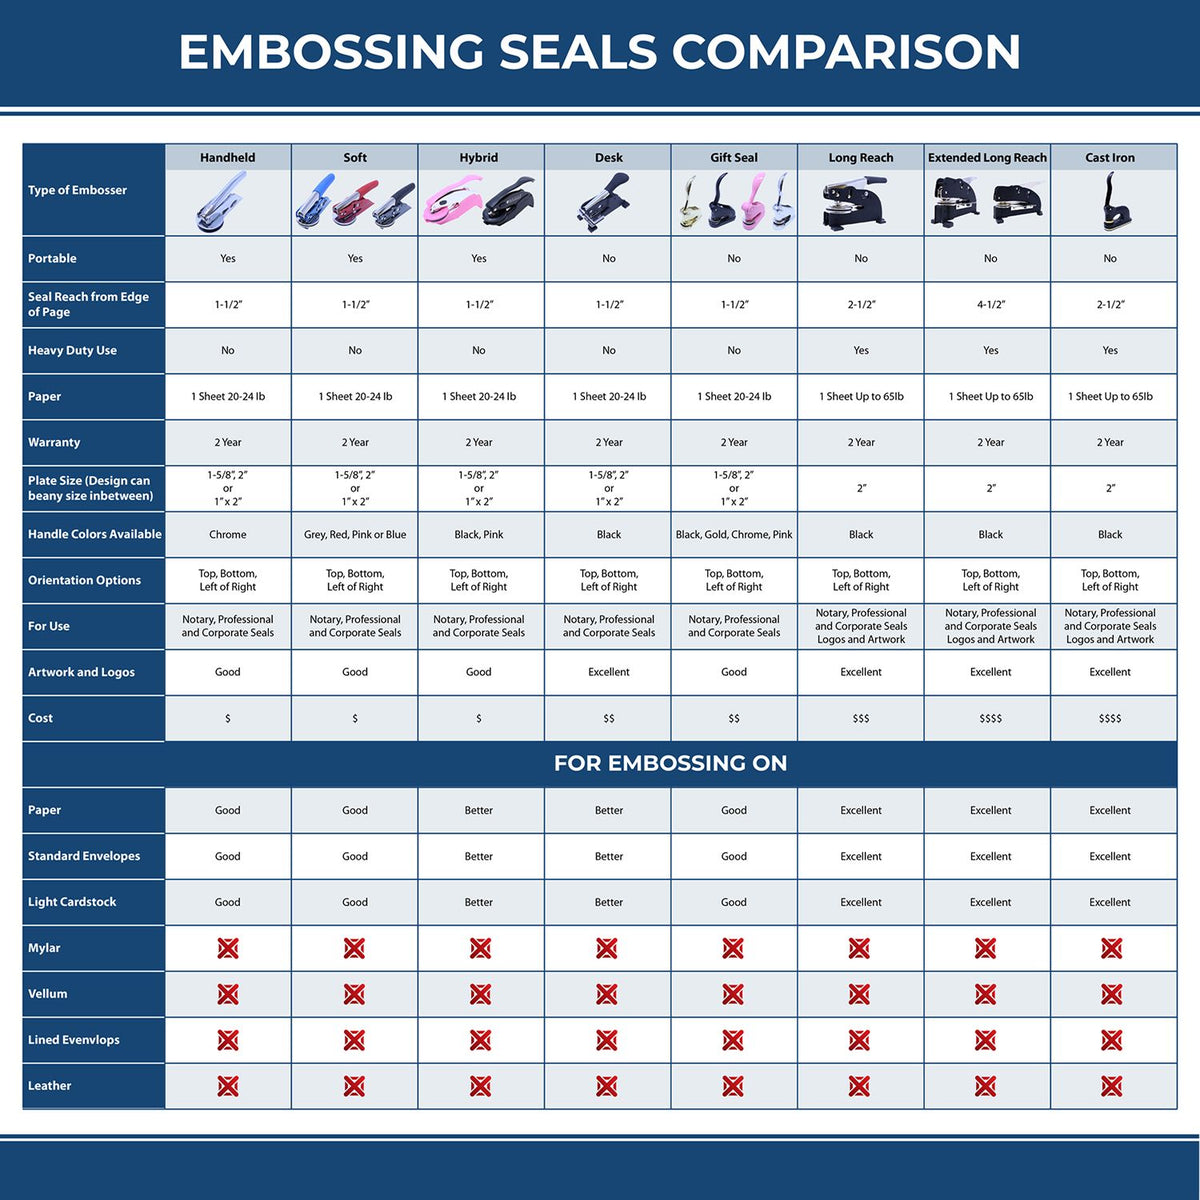 A comparison chart for the different types of mount models available for the Hybrid Arkansas Geologist Seal